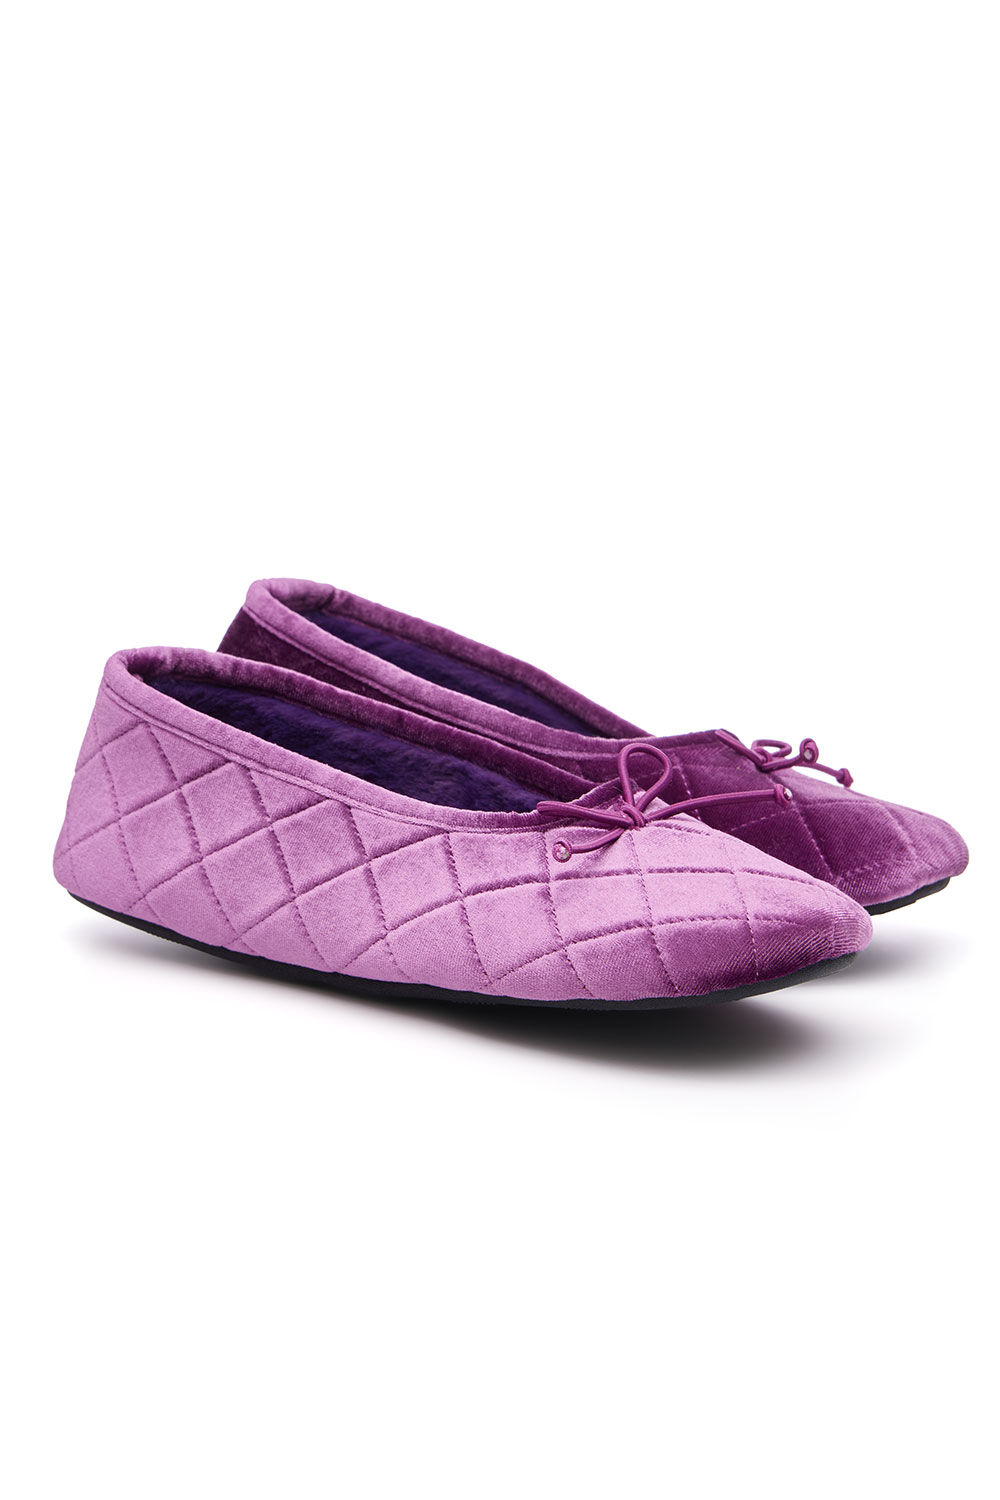 Bonmarche Magenta Velvet Faux Fur Lined Slippers With Bow Detail, Size: 5